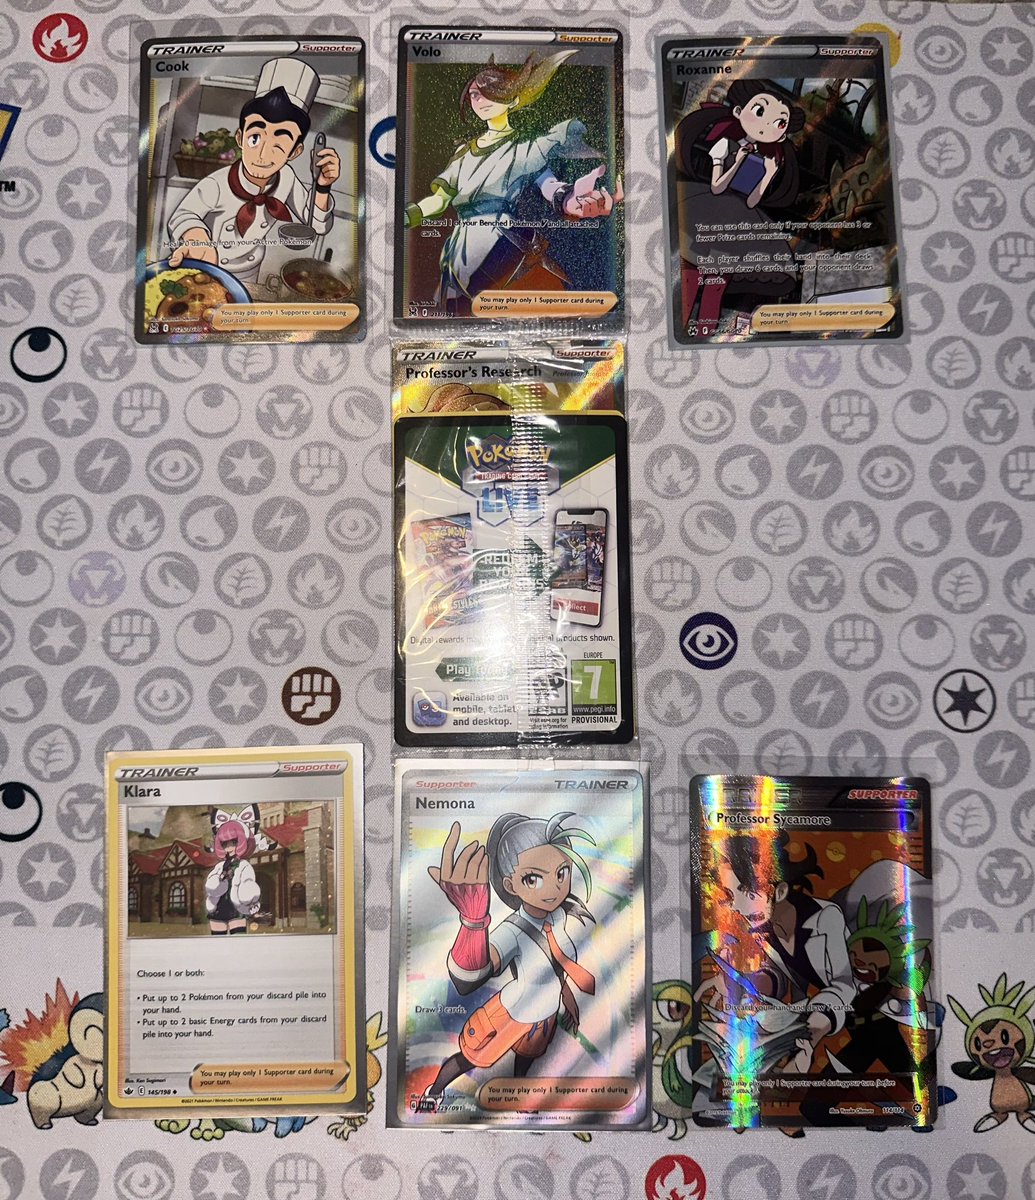 🚨 COLLAB GIVEAWAY 🚨 To give back to the community, THREE WINNERS will have a chance at these FULL ART TRAINER cards! #1 - first pick 🎁🎁🎁 #2 - choice of 🎁🎁 #3 - 🎁 ✅ FOLLOW @2thehillsss @KSquared2015 @redribbontcg @SteeloAndKri ♻️ REPOST Ends 5/21! 🍀🙇🏽‍♂️ US Only #FATCC